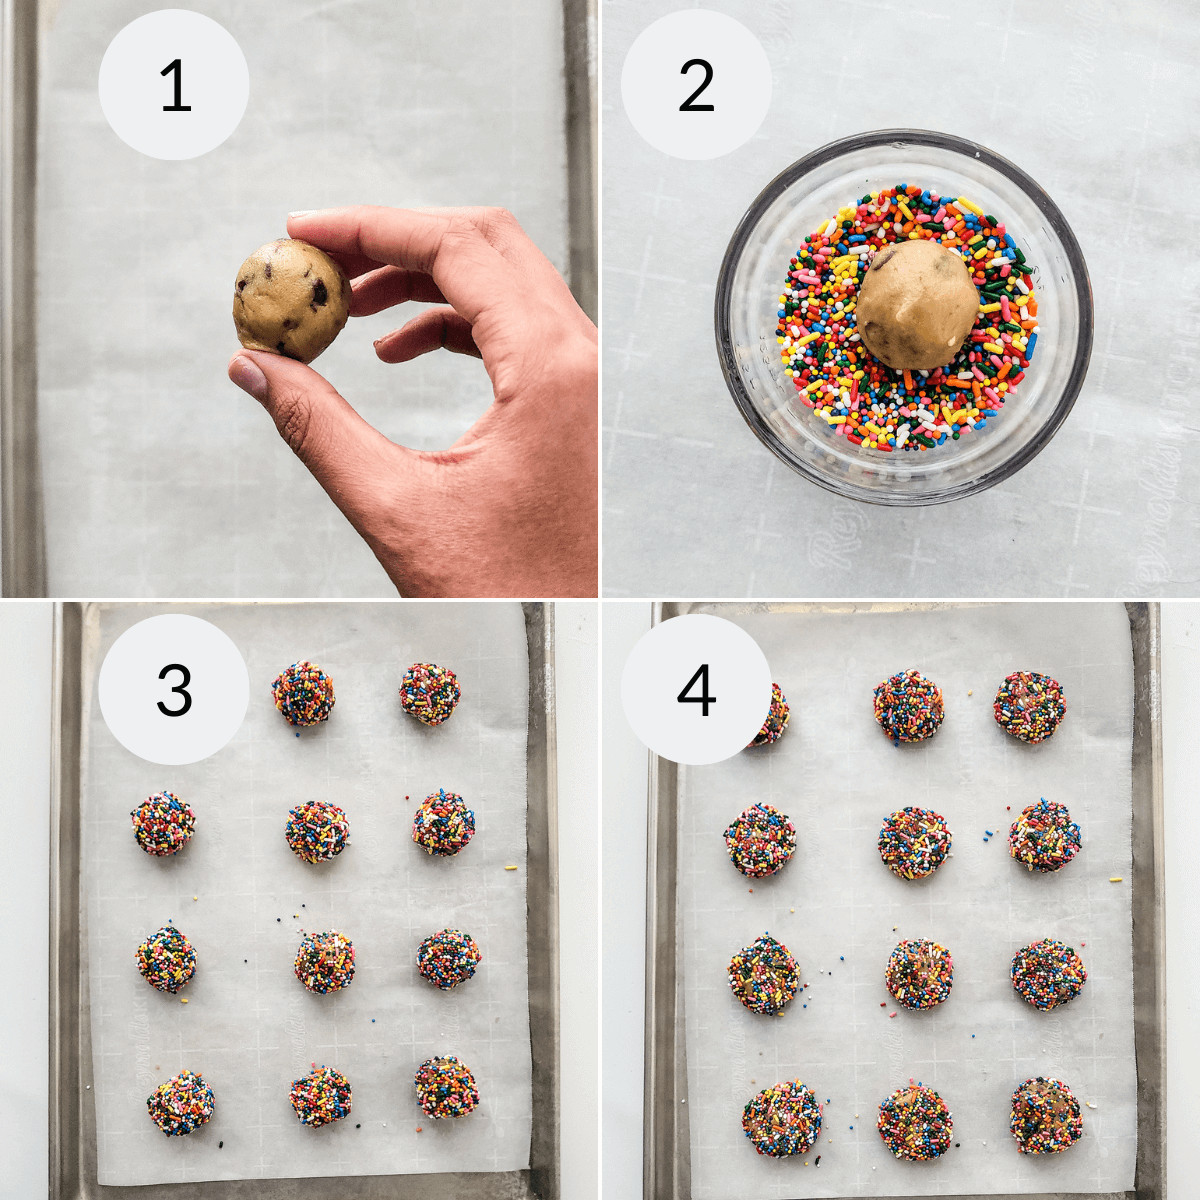 Preparing the cookie balls and placing them on a baking tray.